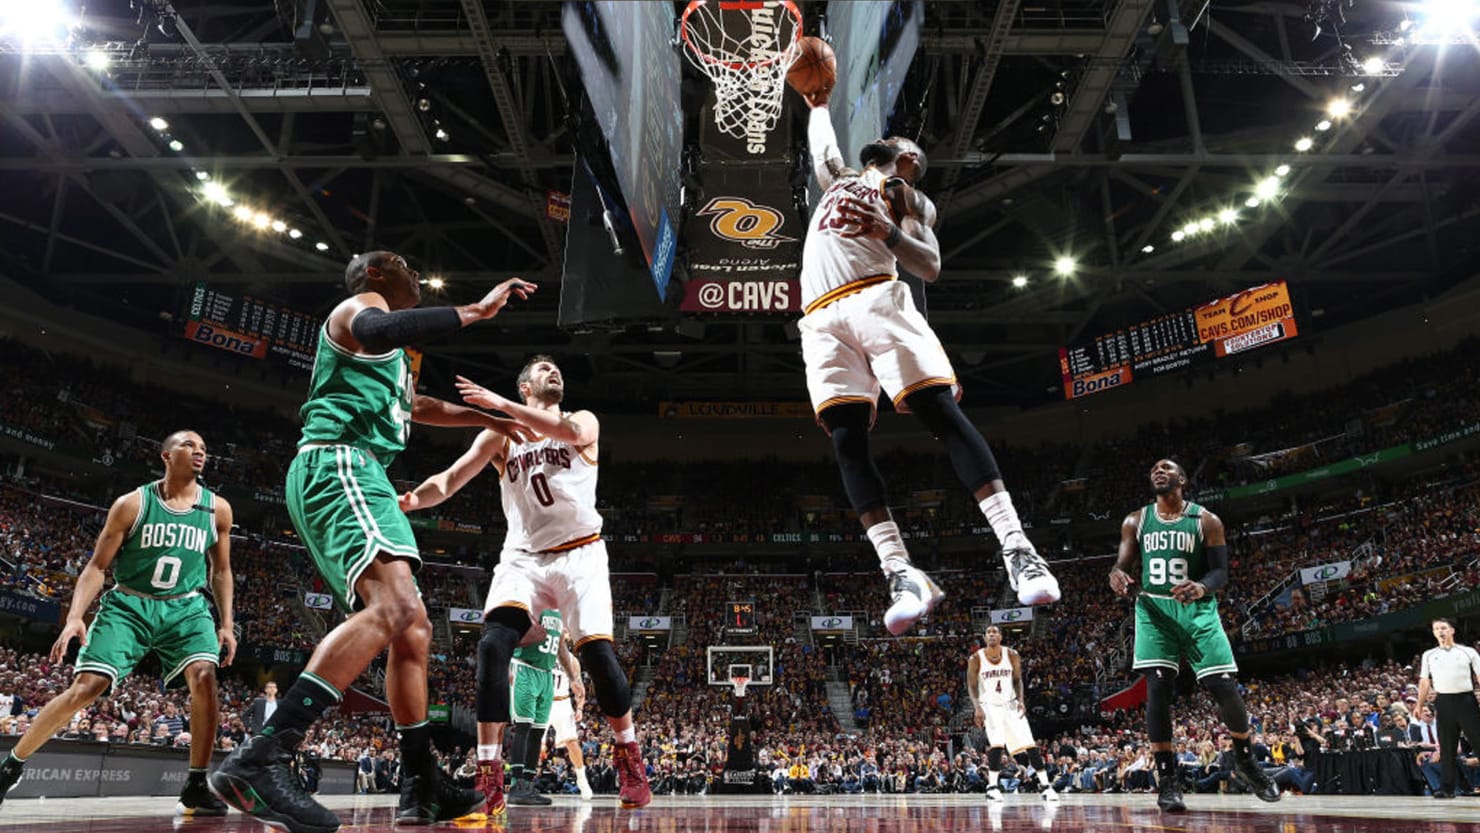 Cavaliers vs. Celtics Game 5: How to Watch Live Stream Online